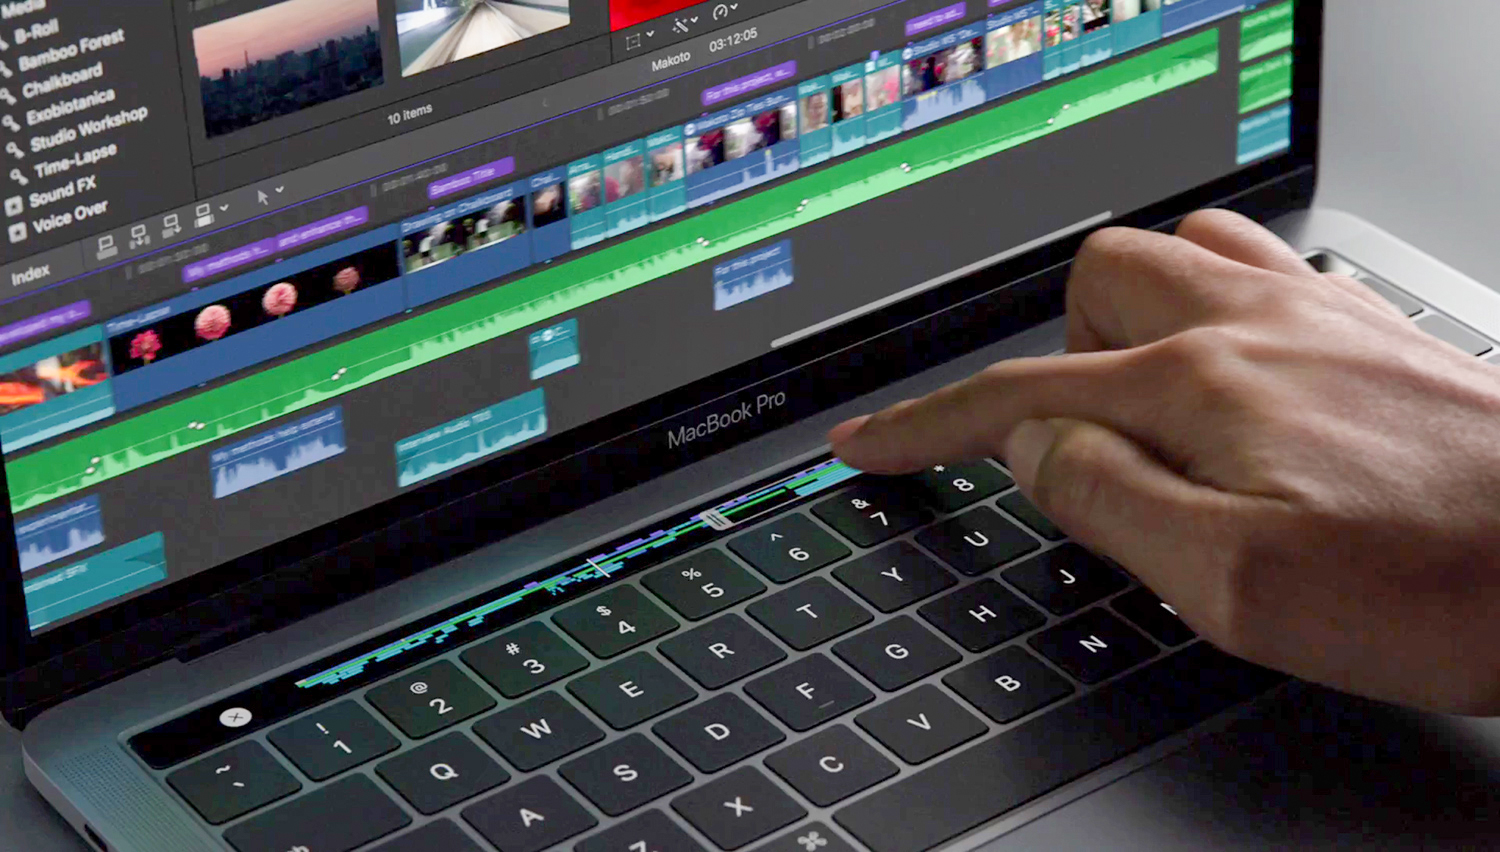 Why Apple Finally Killed the Touch Bar on the MacBook Pro